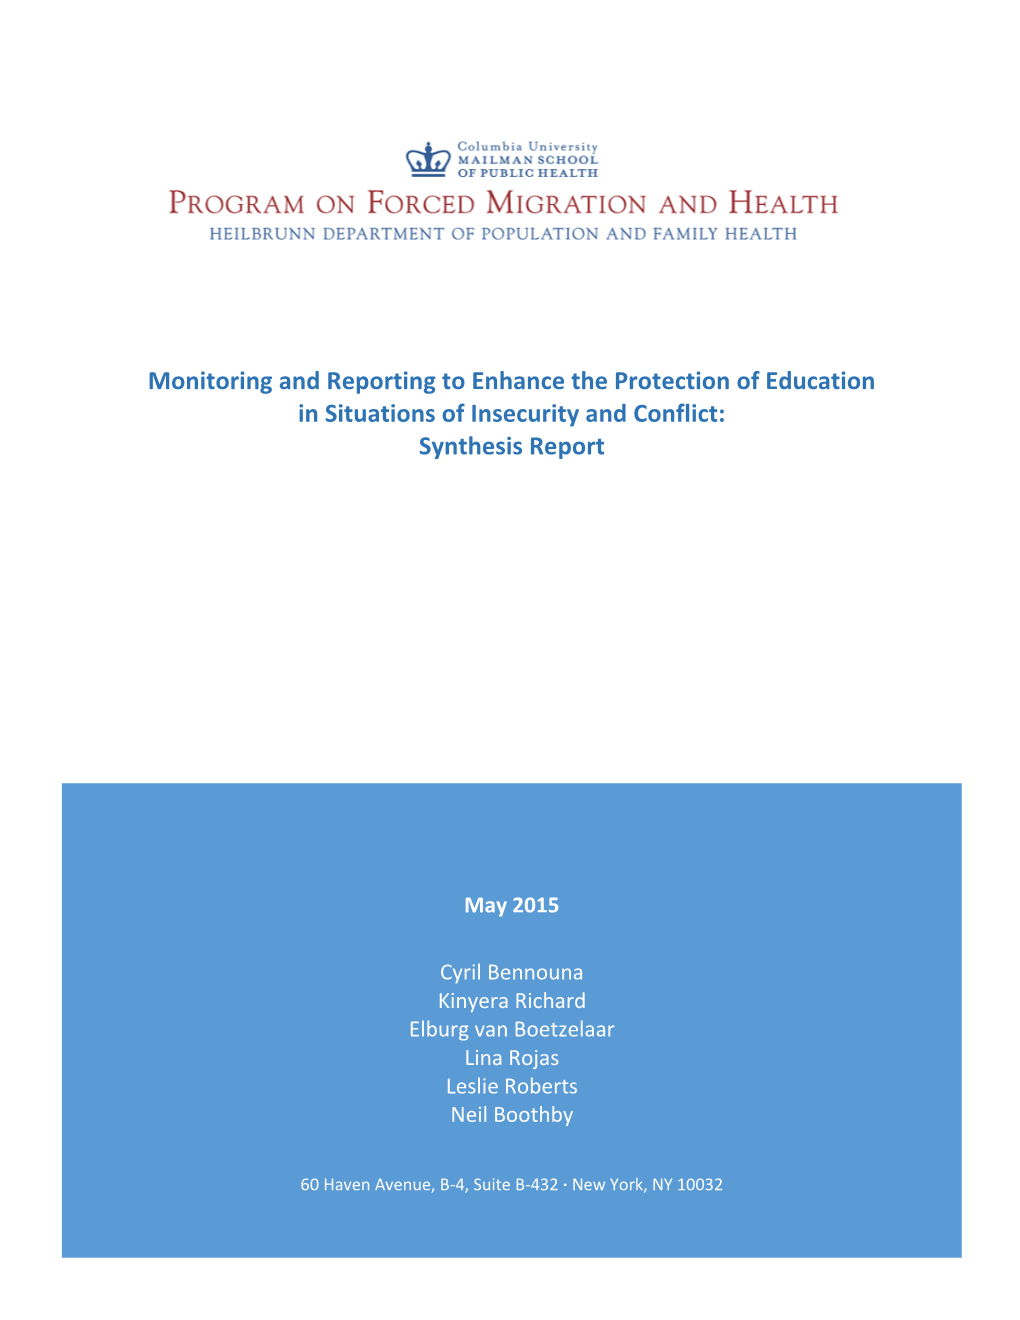 Monitoring and Reporting to Enhance the Protection of Education in Situations of Insecurity and Conflict: Synthesis Report